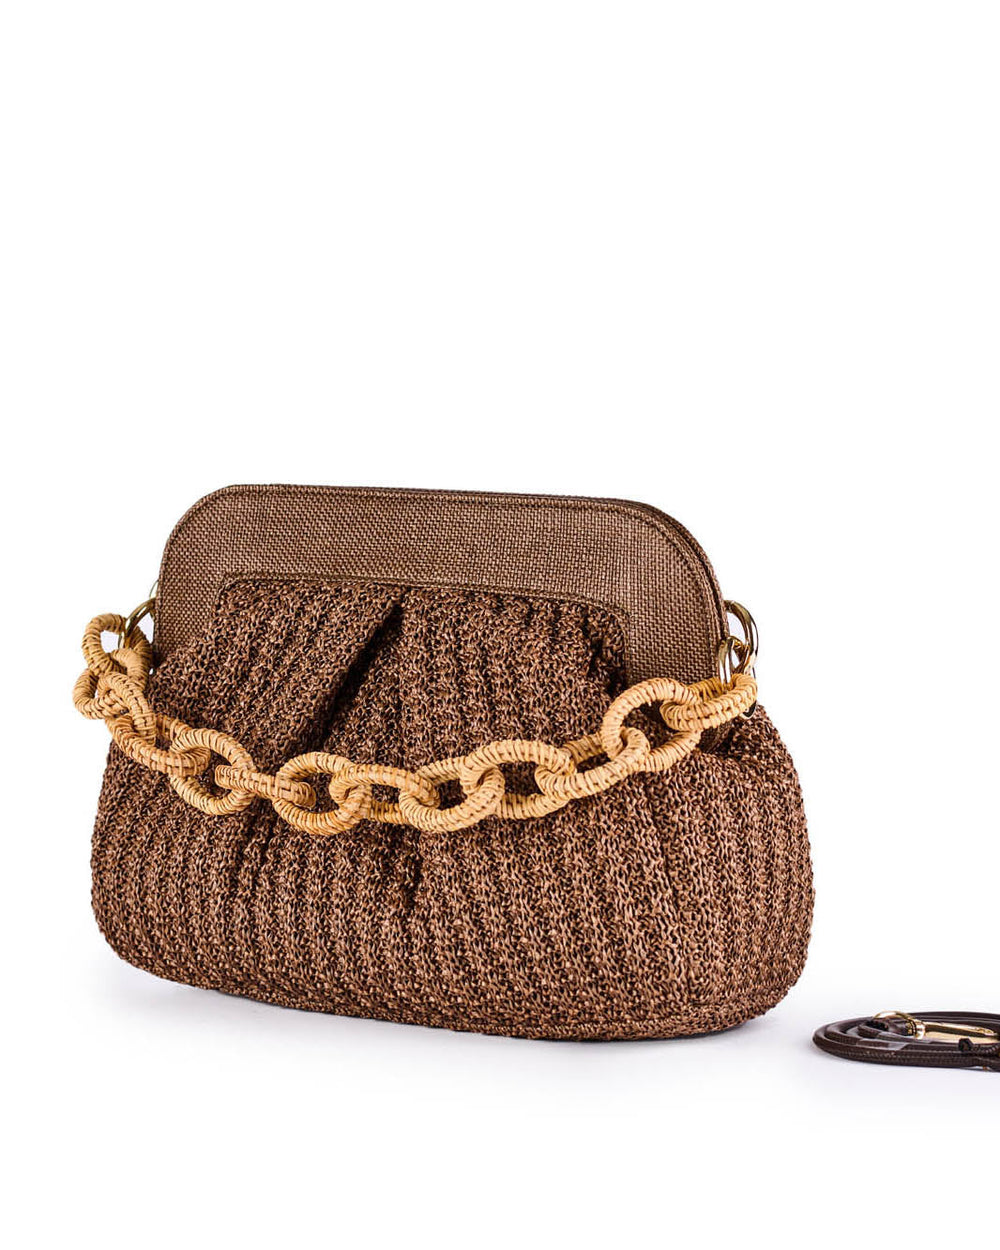 Handwoven brown handbag with gold chain detail and shoulder strap